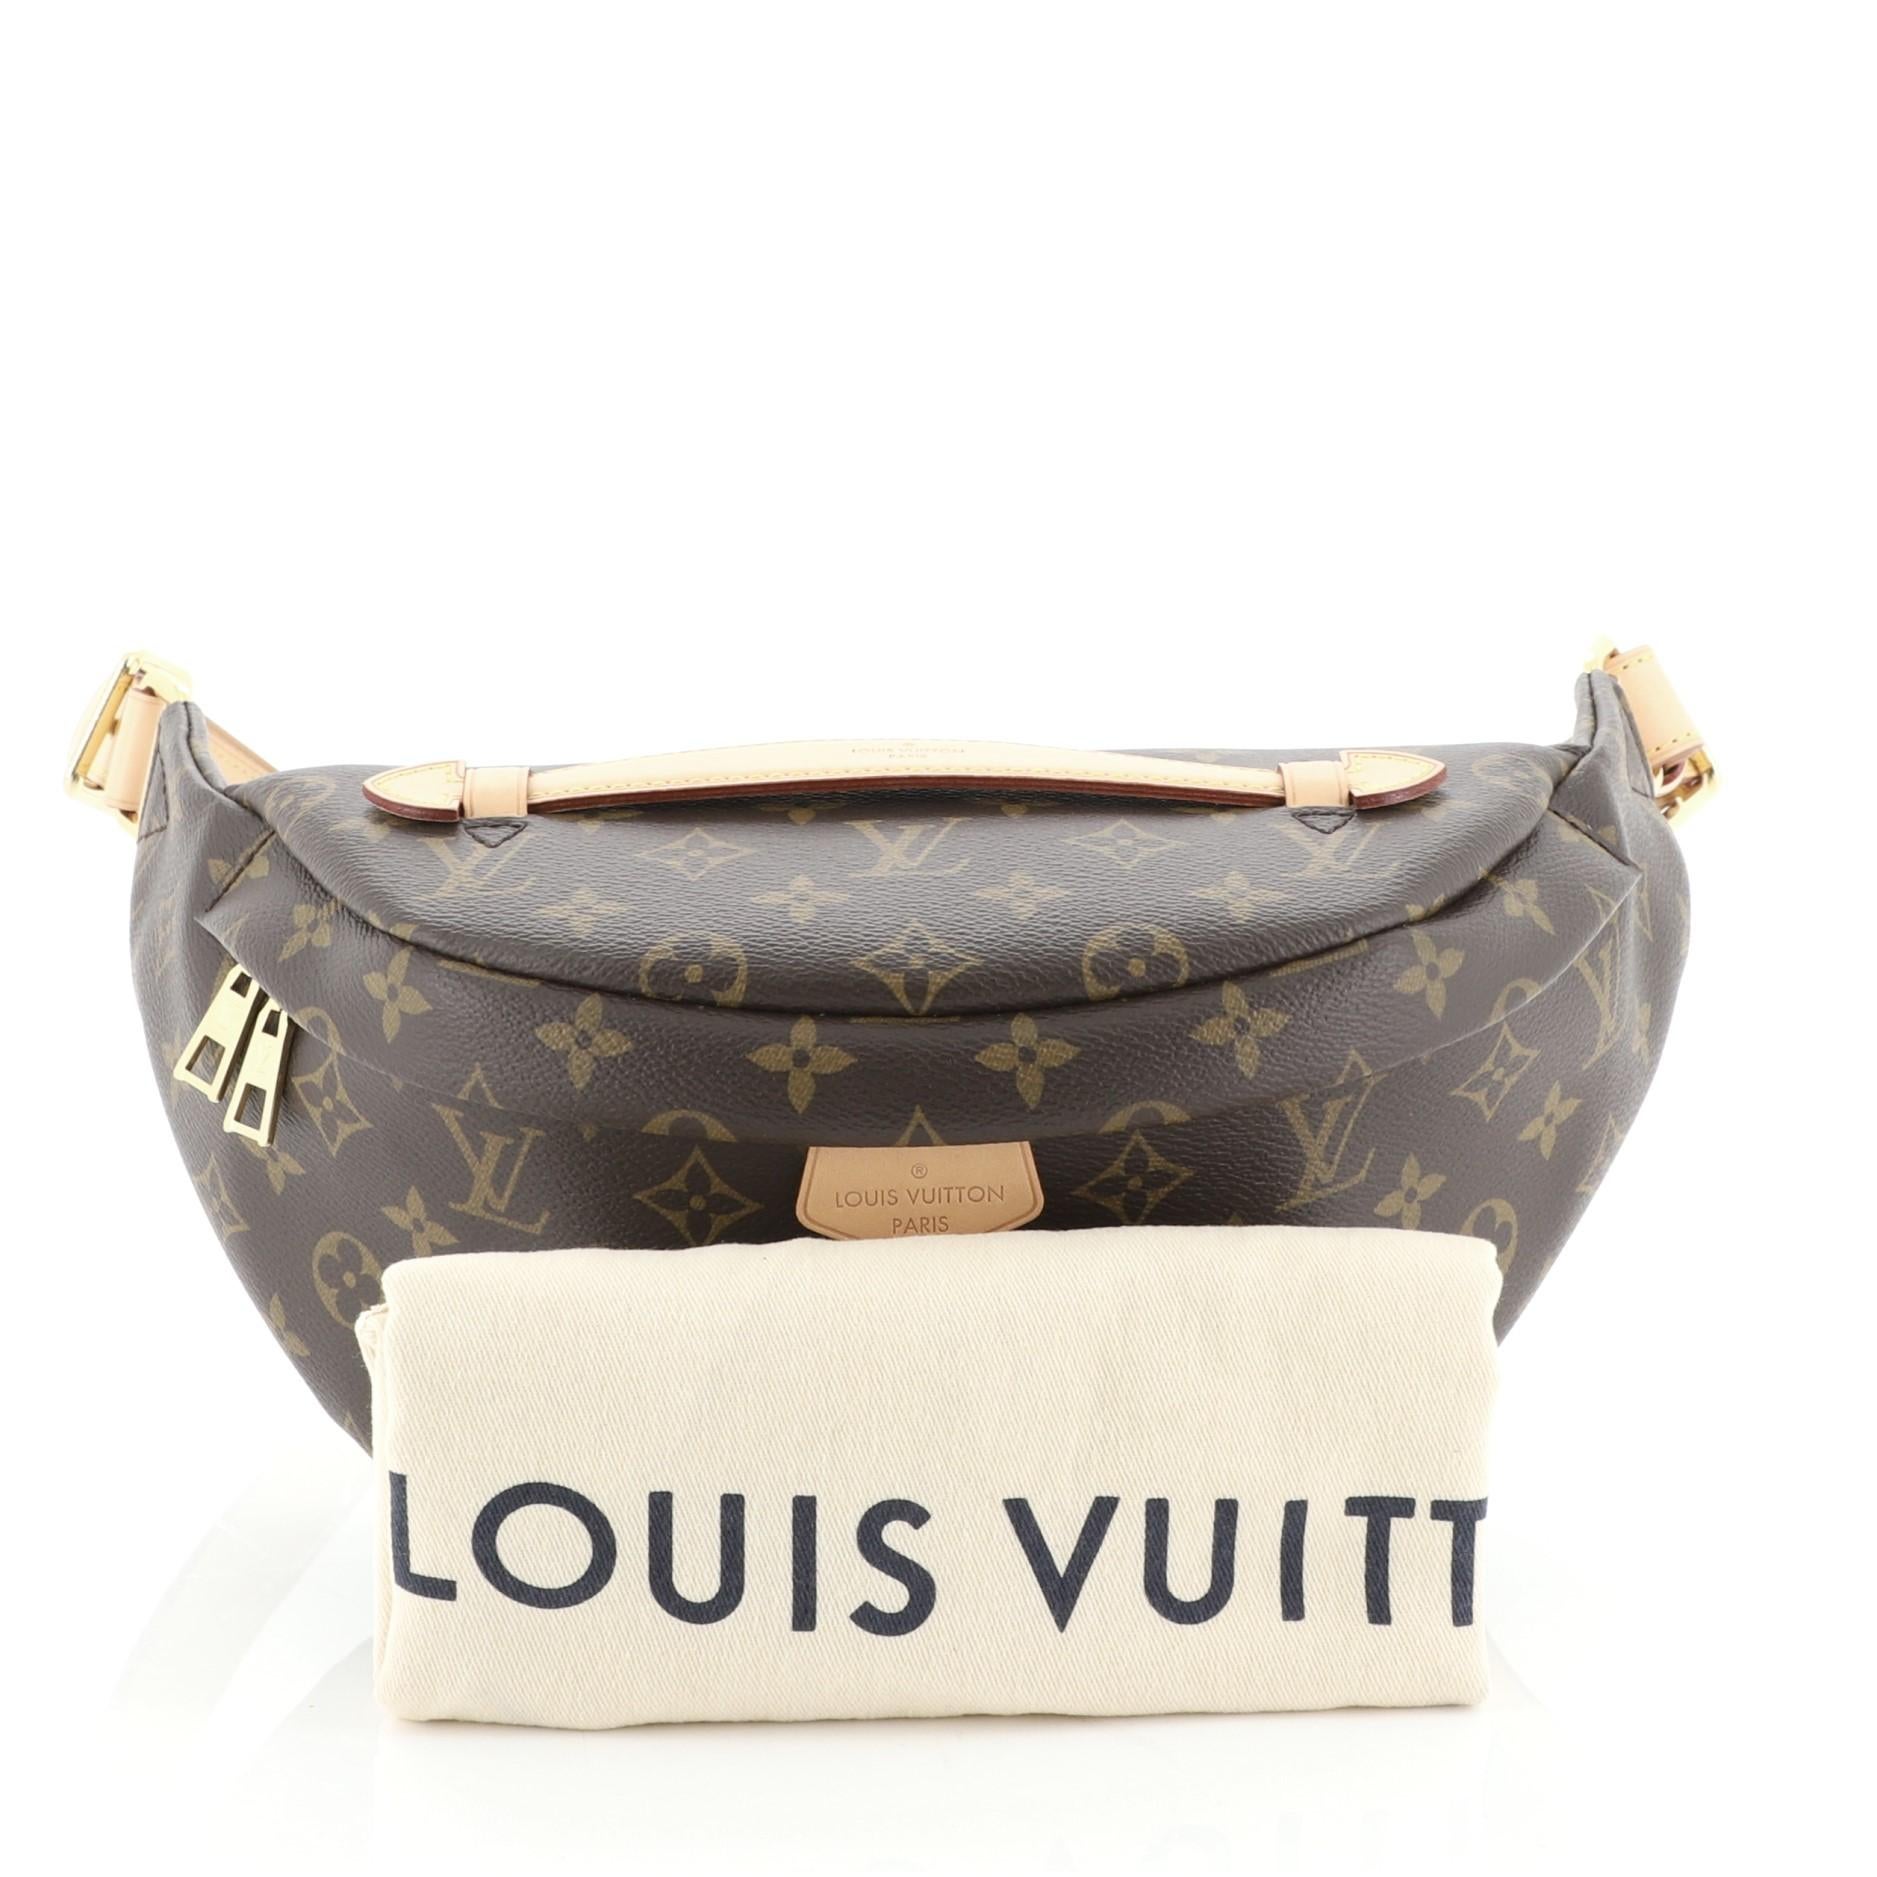 This Louis Vuitton Bum Bag Monogram Canvas, crafted from brown monogram coated canvas, features an adjustable strap, leather top handle, exterior back zip pocket, and gold-tone hardware. Its zip closure opens to a black fabric interior with slip